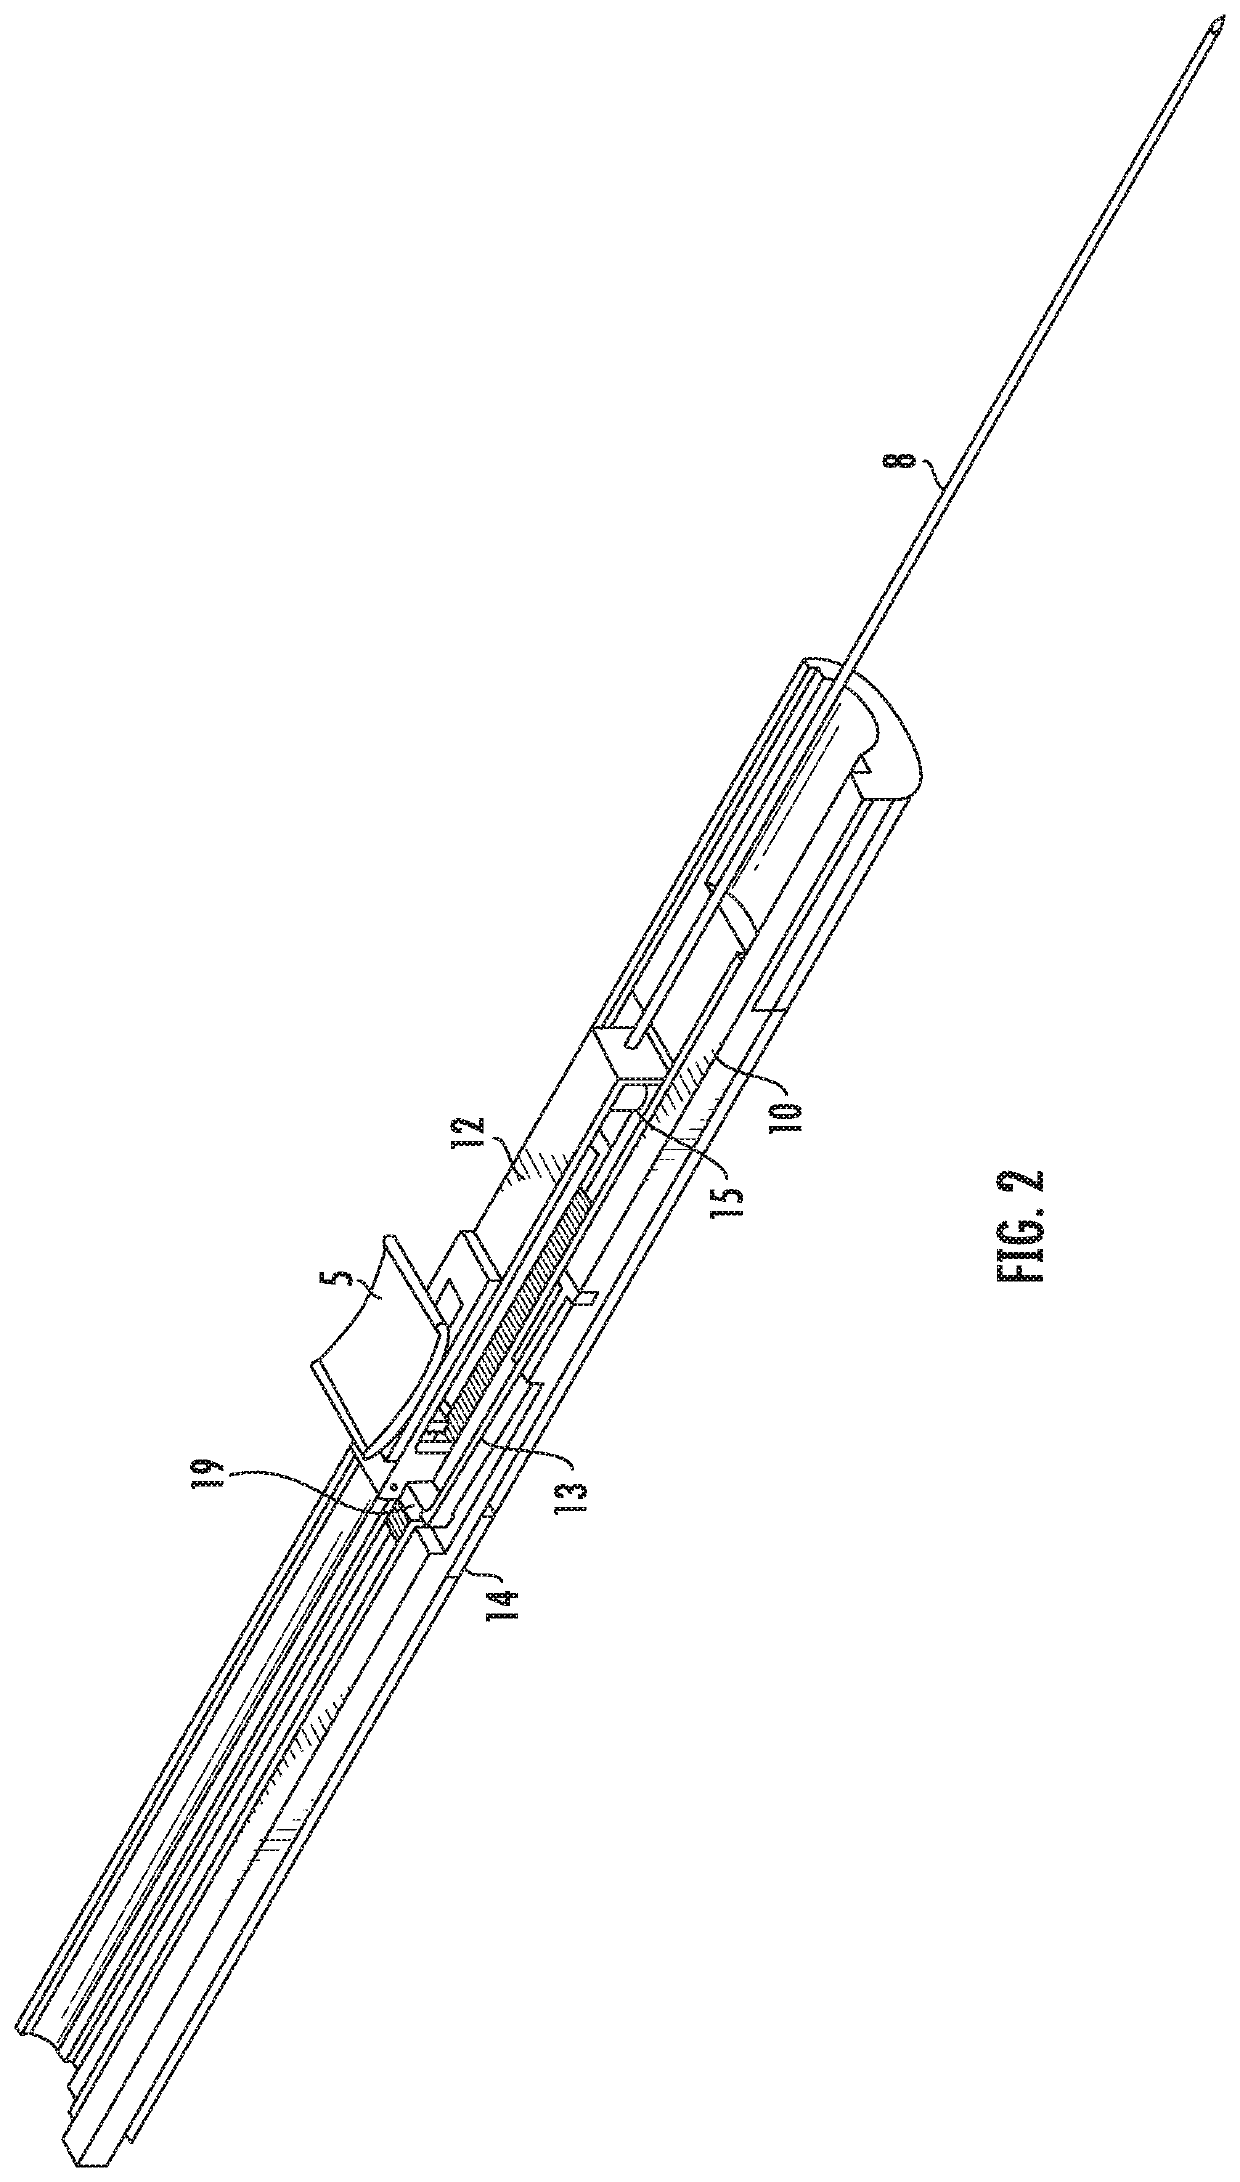 Safety device for retraction of a needle and guidewire for medical procedures and method of use